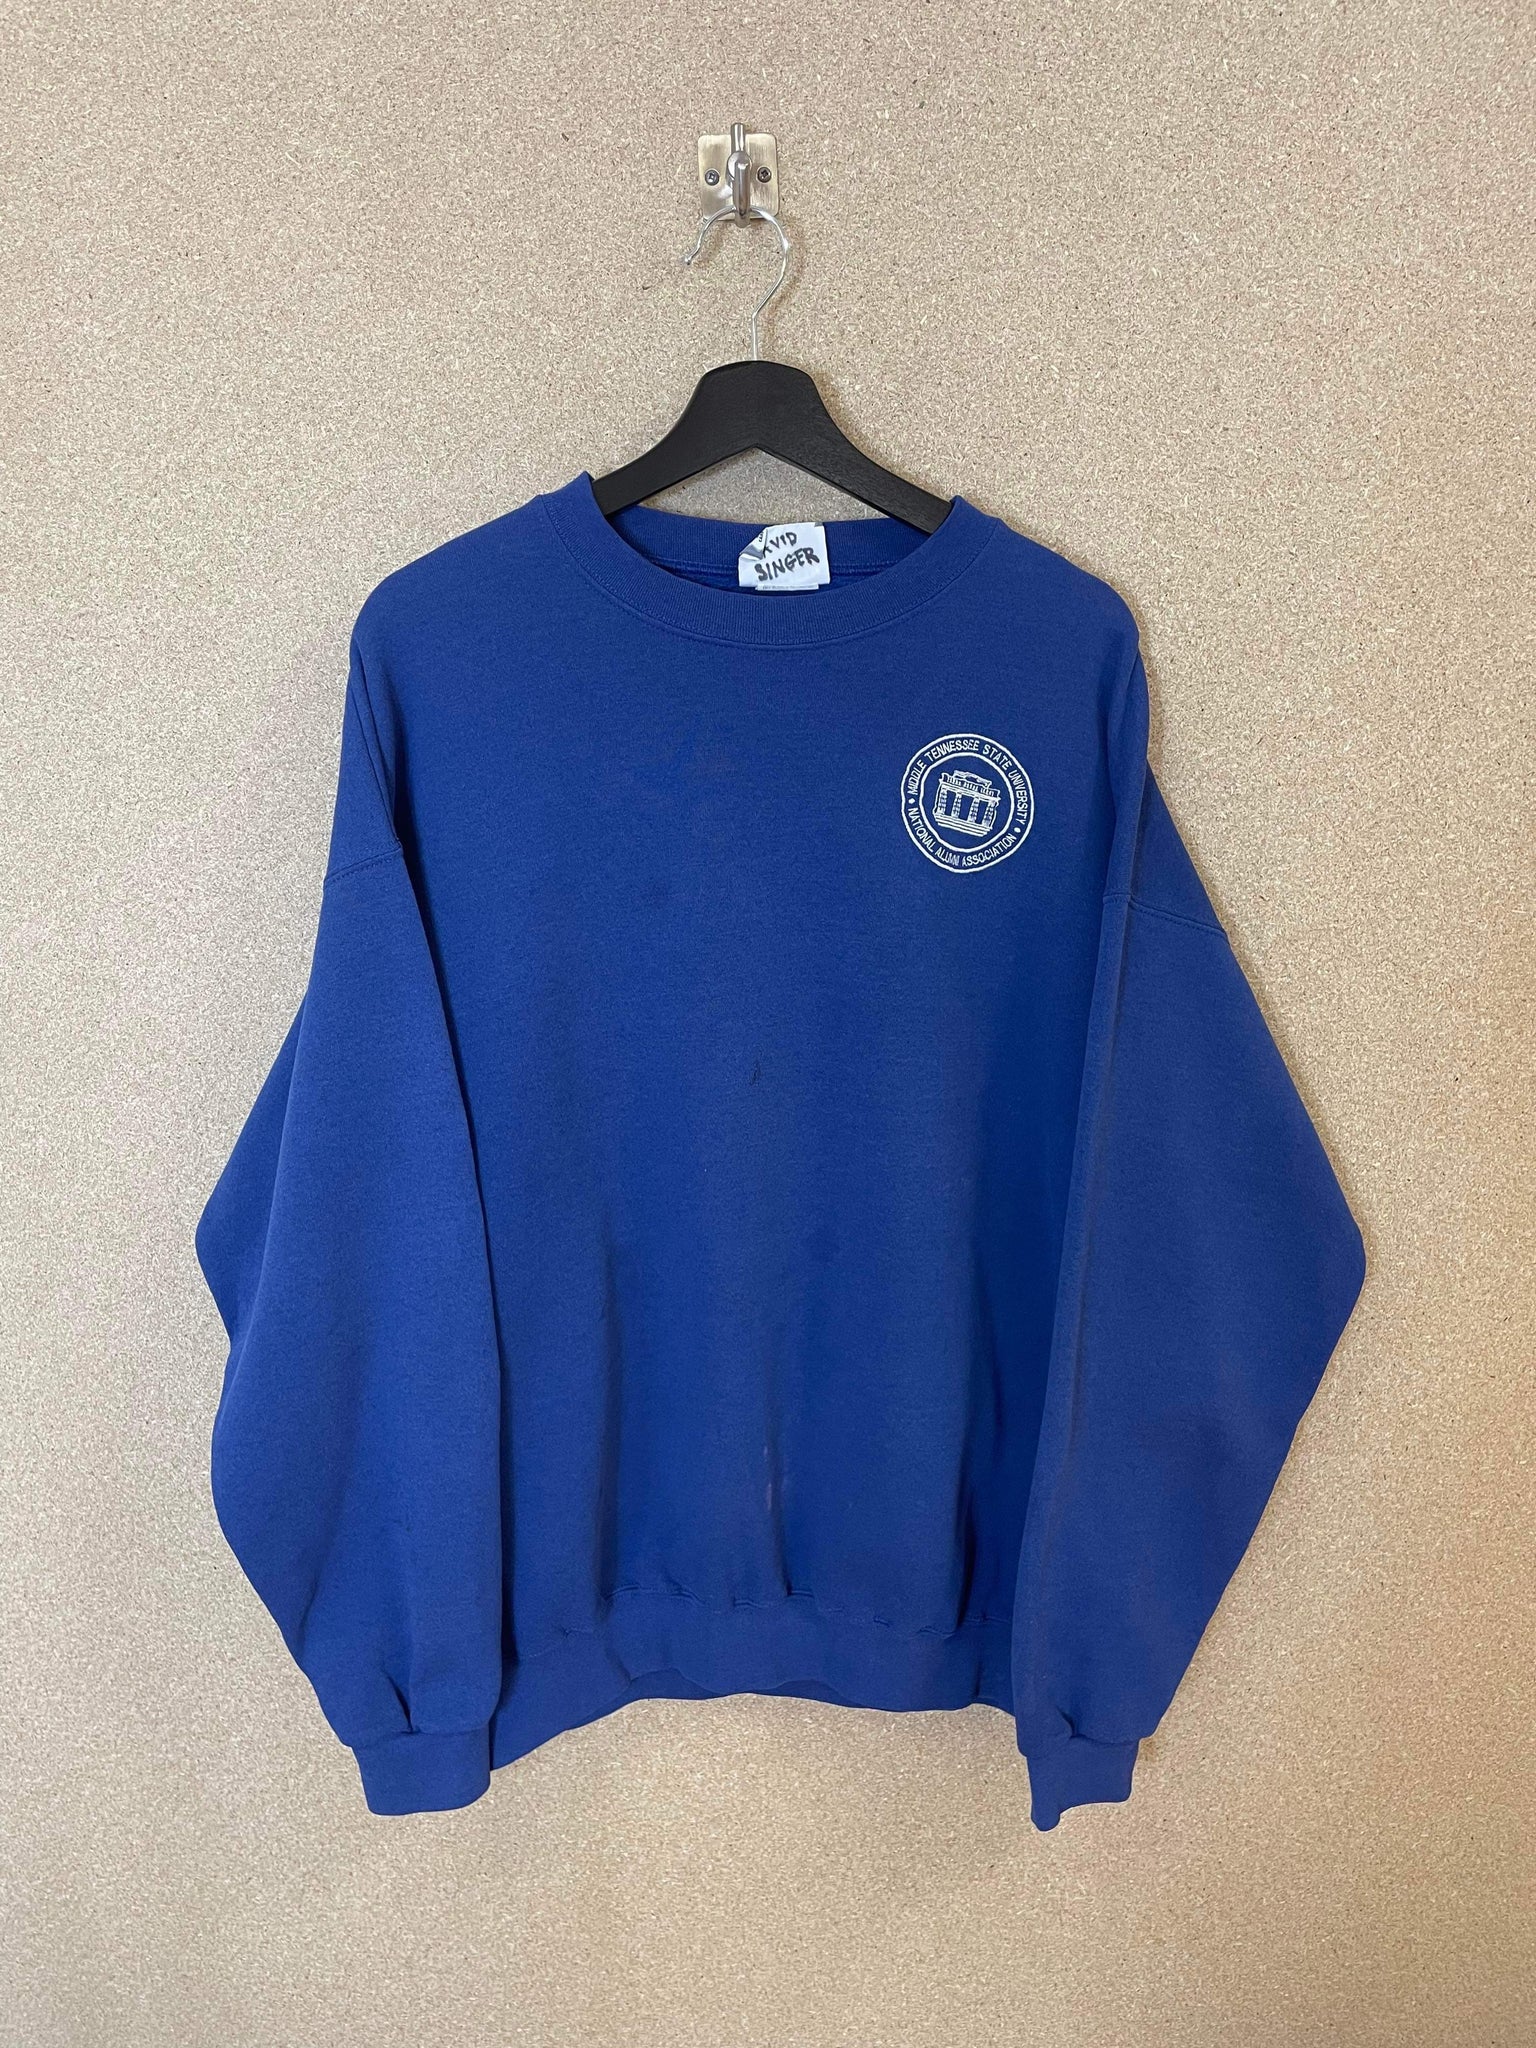 Vintage Middle Tennessee State University 90s Sweatshirt - XL